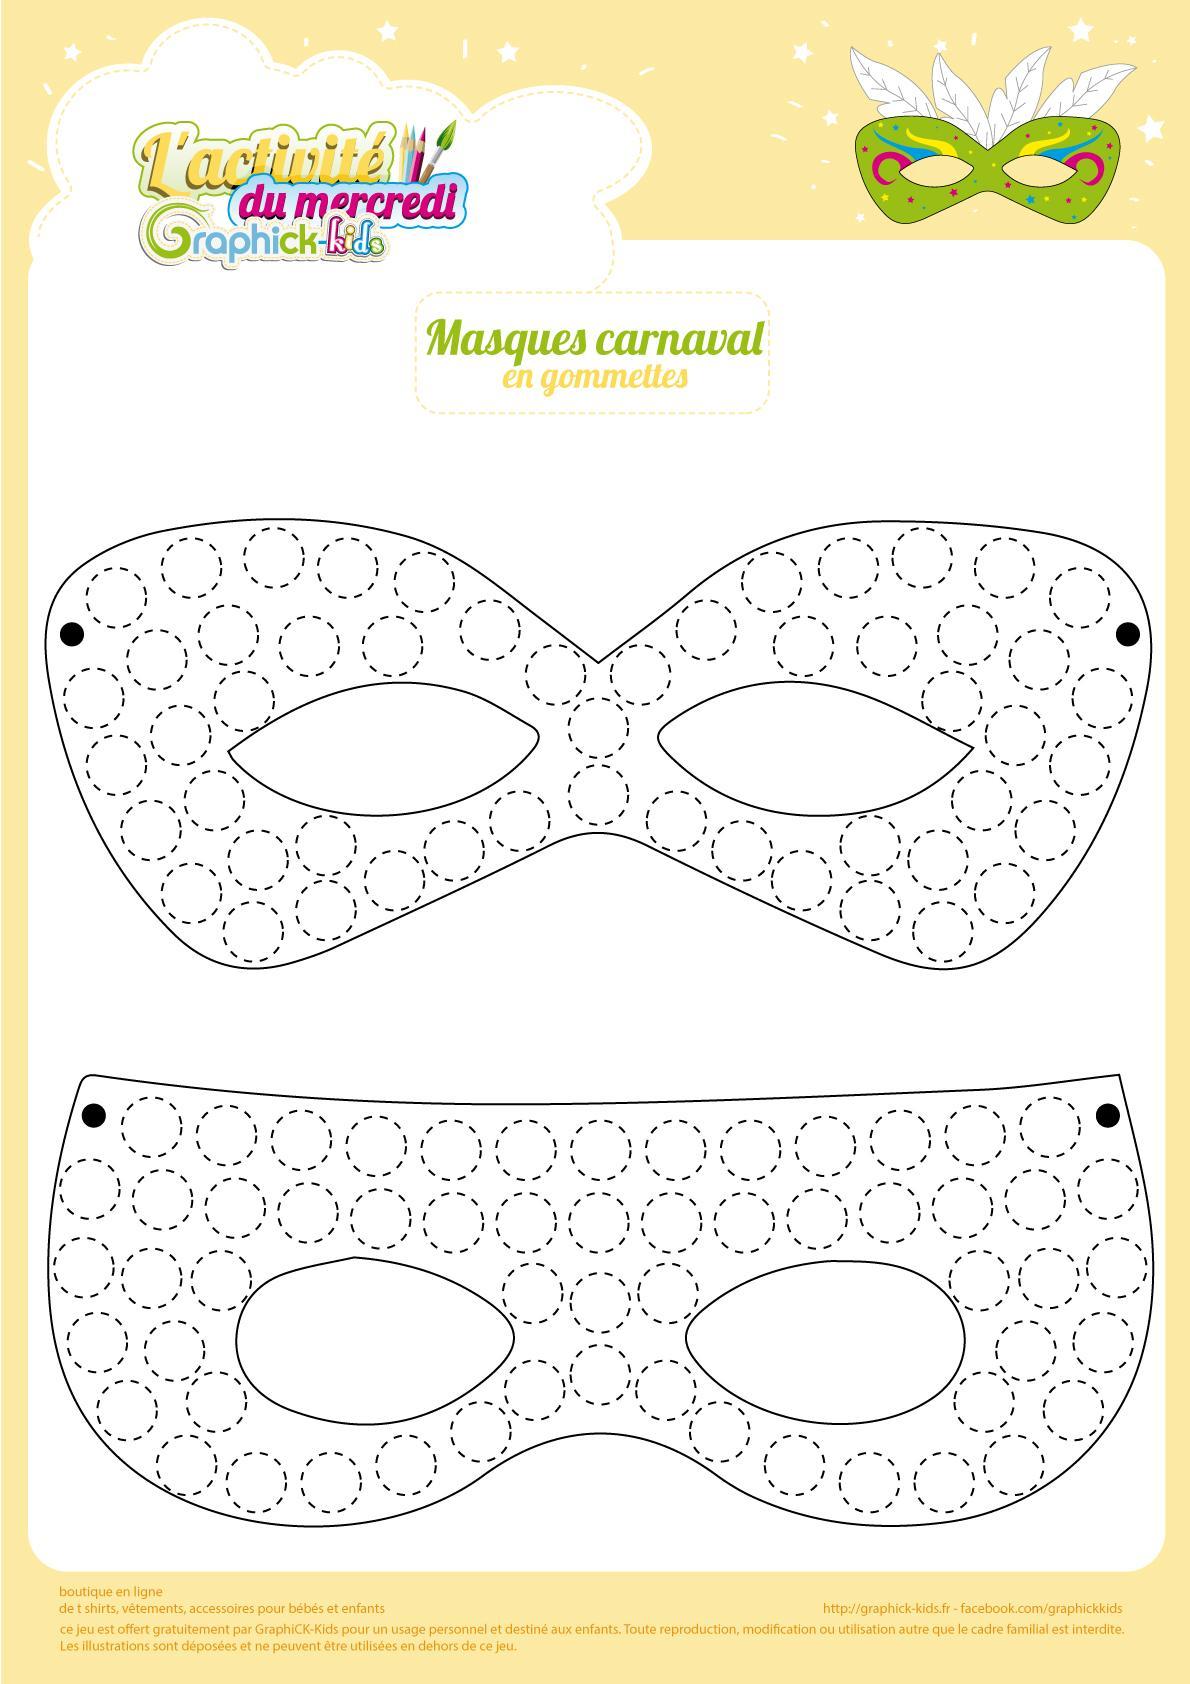 masques carnaval gommettes